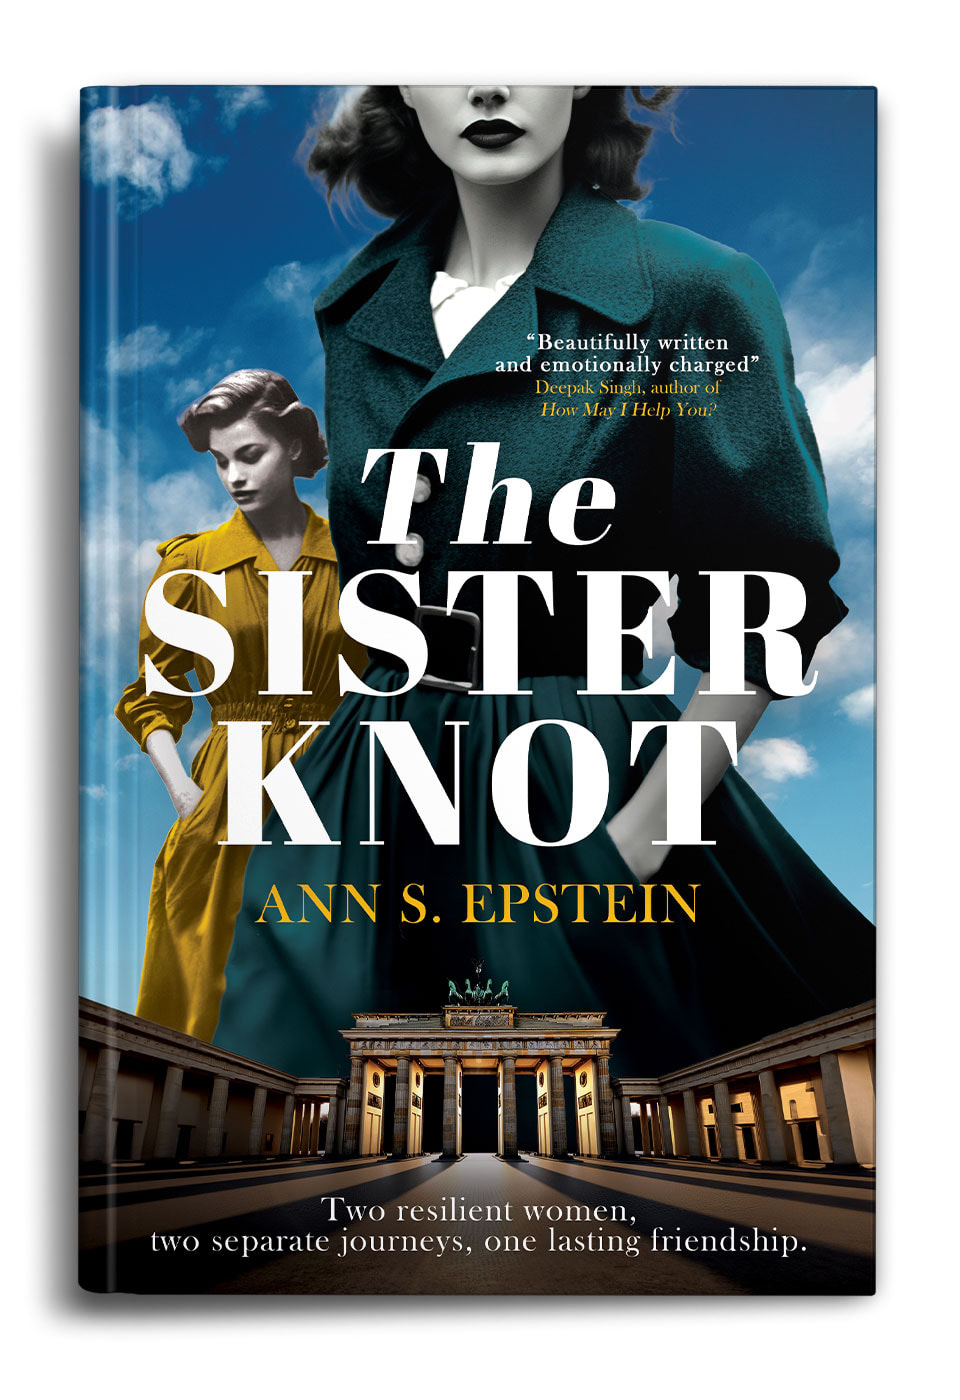 The-Sister-Knot-by-Ann-S-Epstein